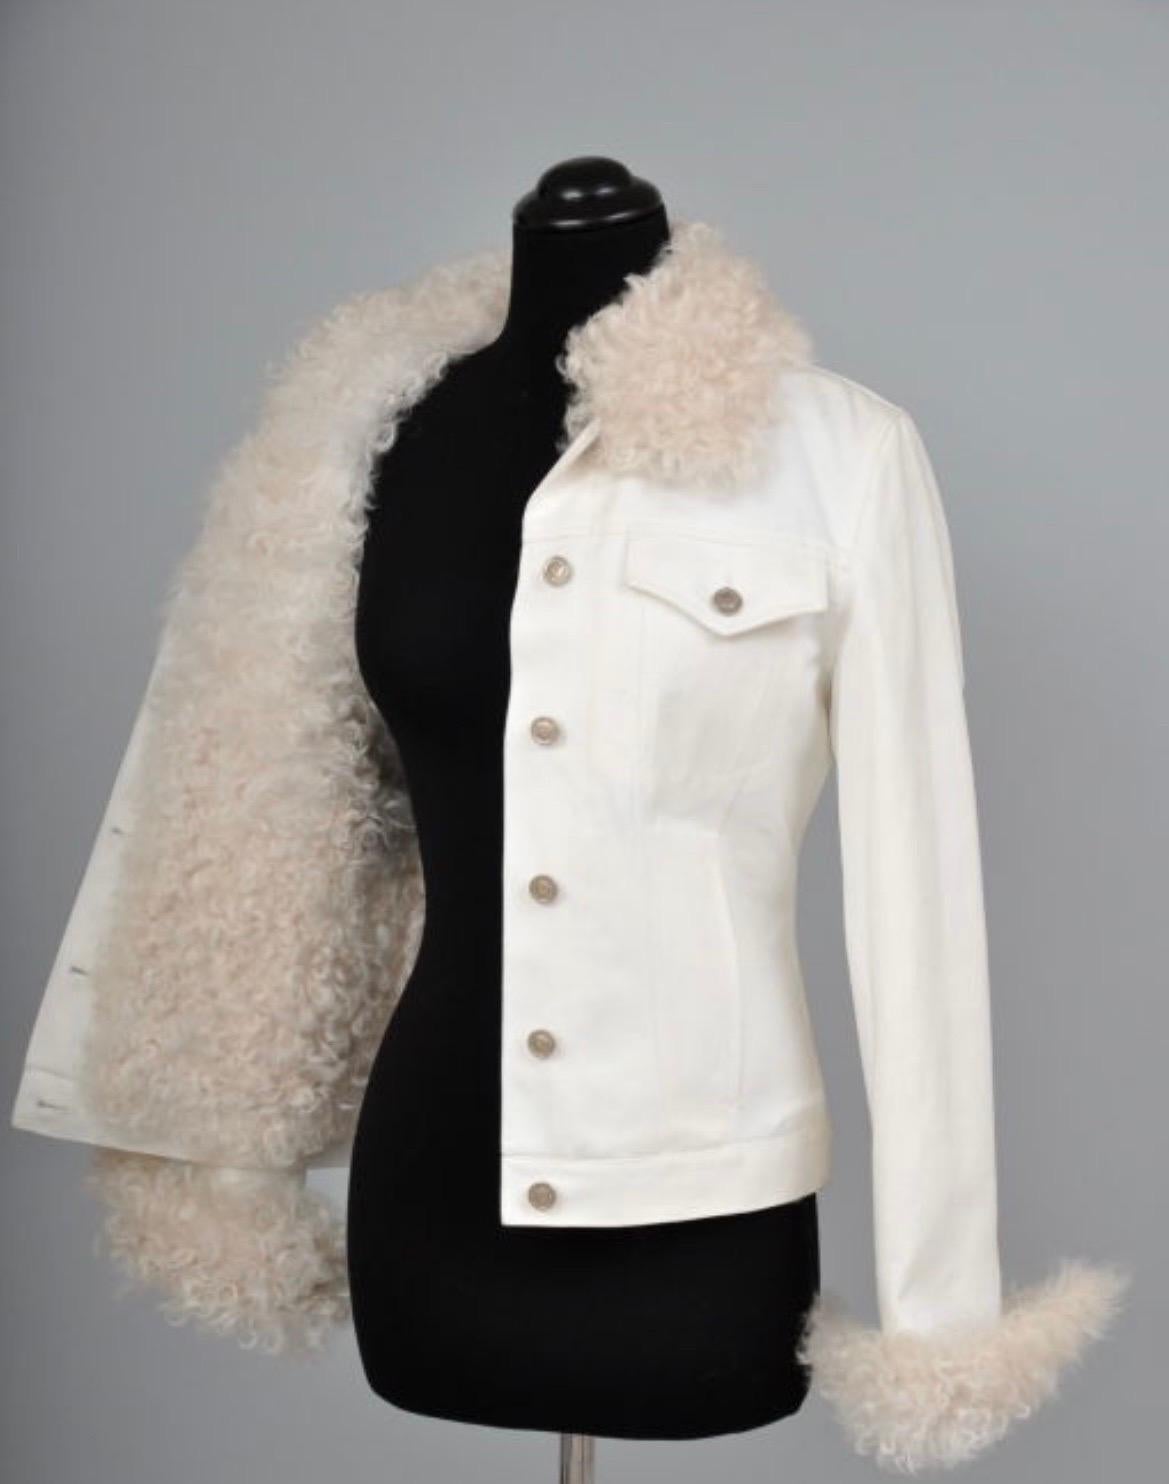 A/W 2001 Vintage Tom Ford for Gucci White Denim and Lamb Fur Jacket NWT For Sale 1